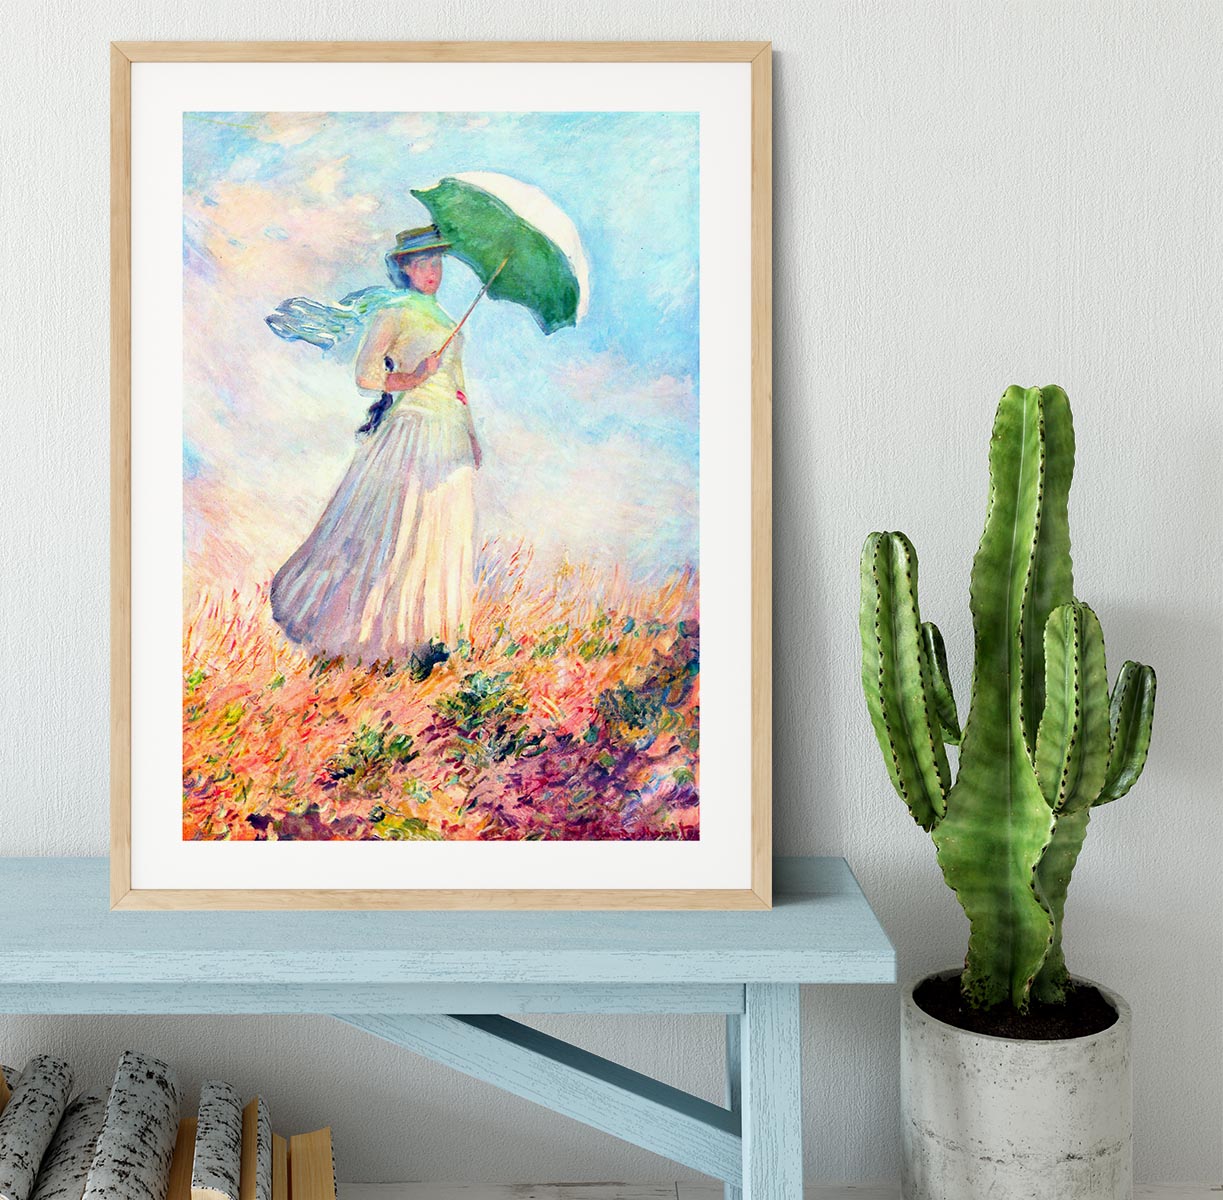 Lady with sunshade study by Monet Framed Print - Canvas Art Rocks - 3